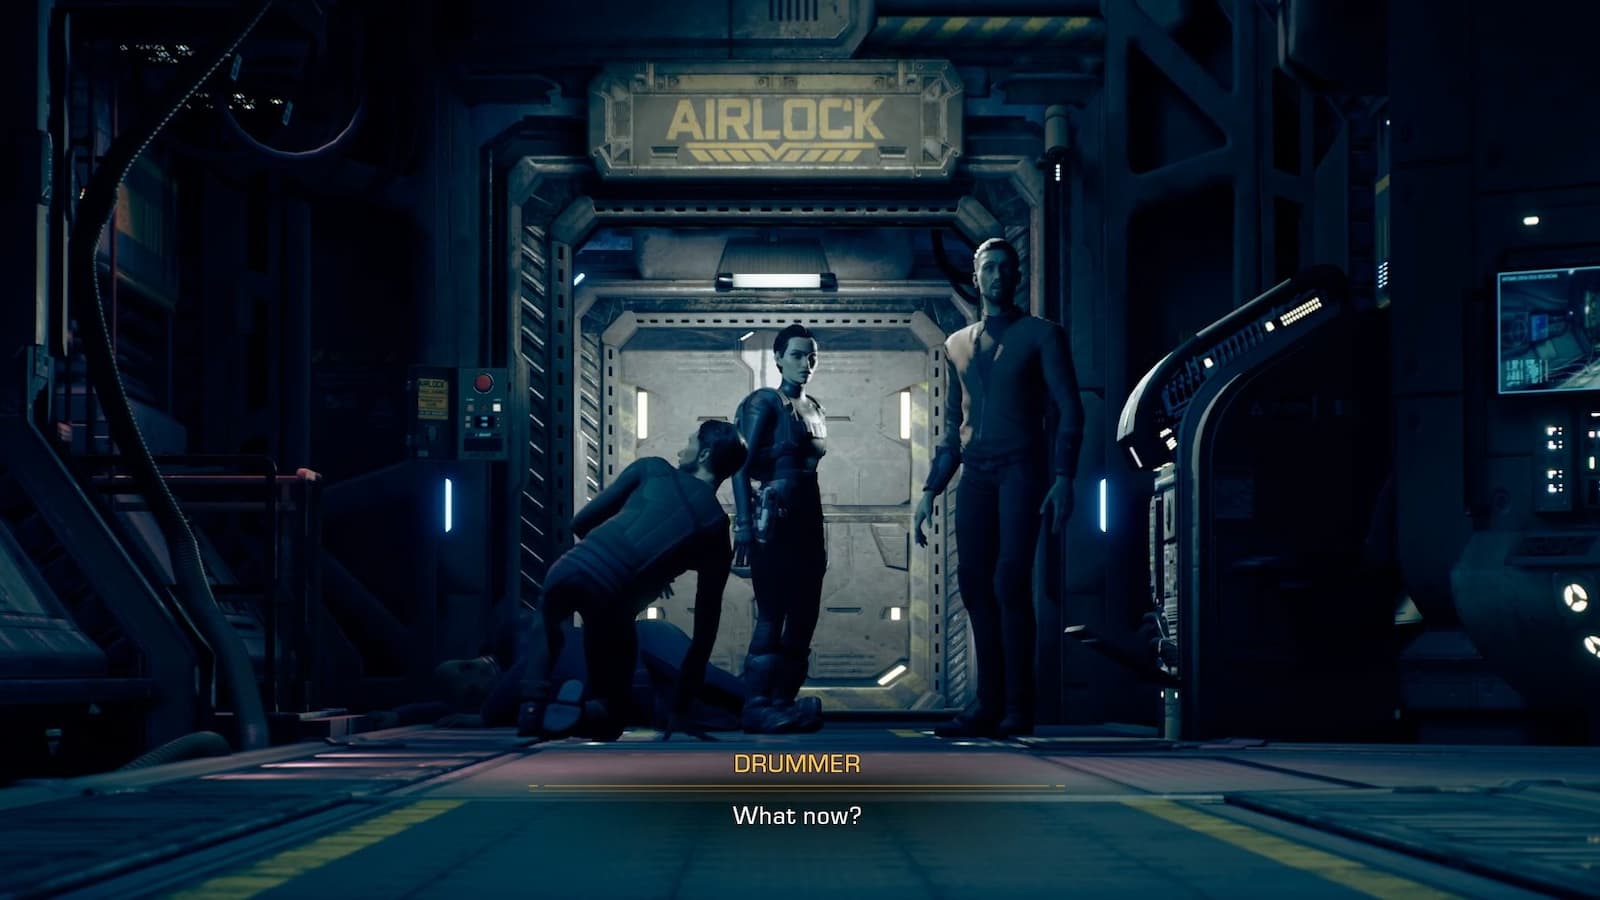 Screenshot from The Expanse: A Telltale Series video game.